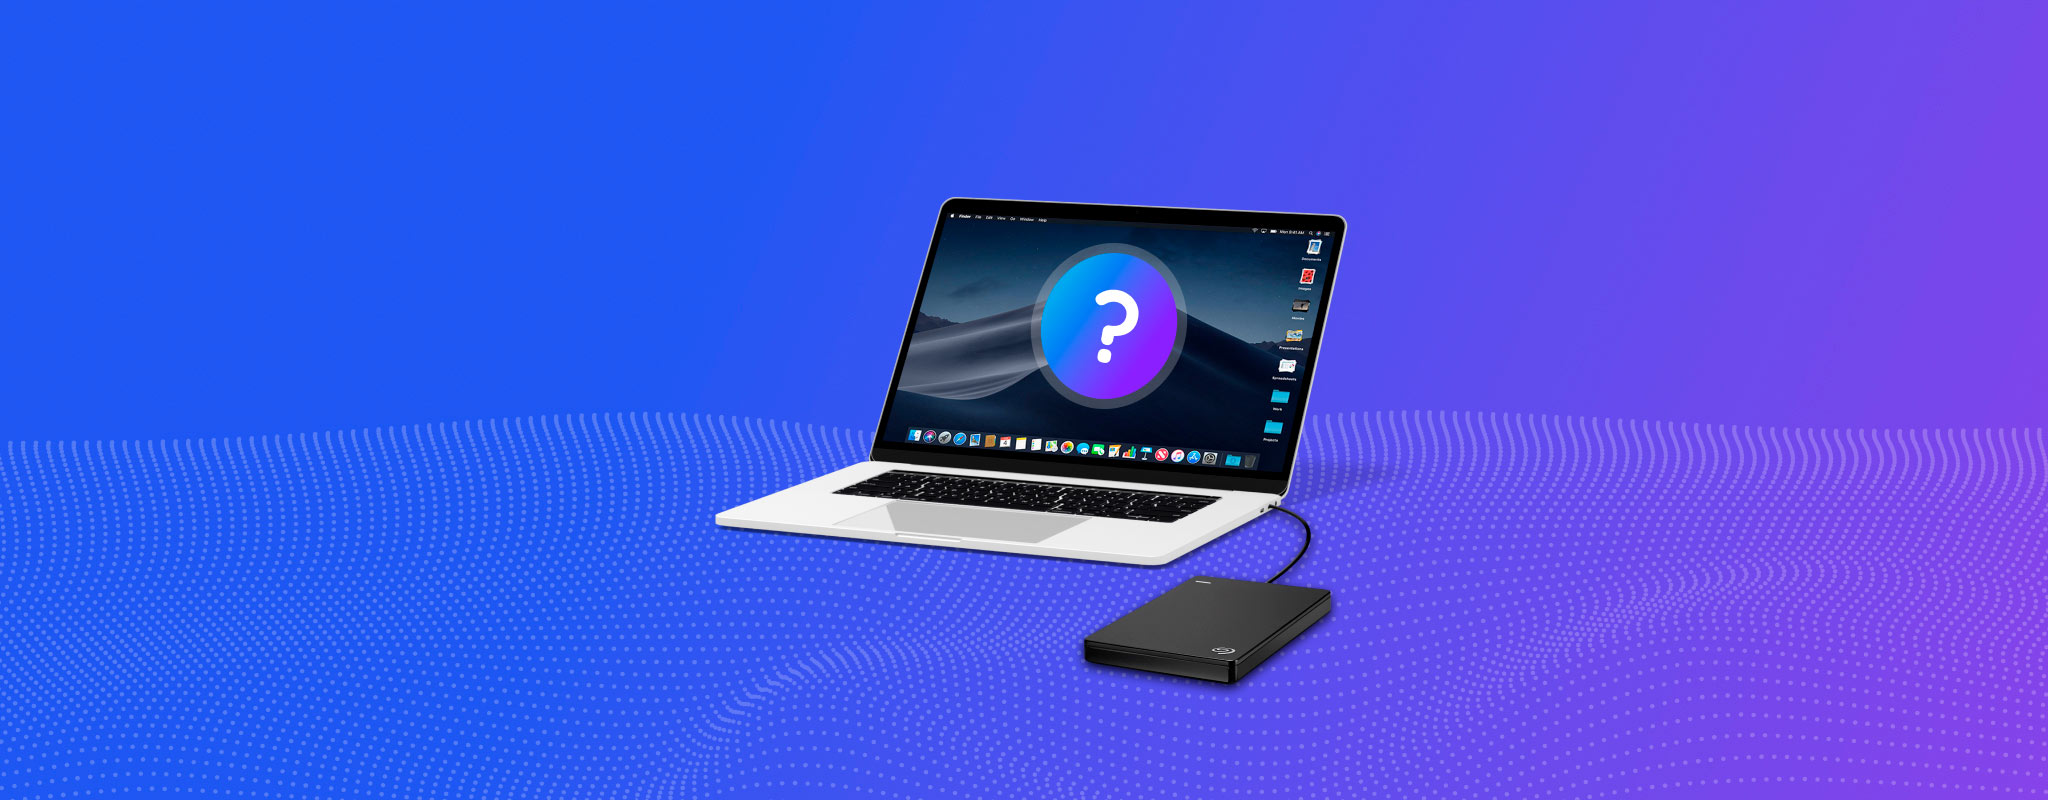 external drive for windows 7 and mac